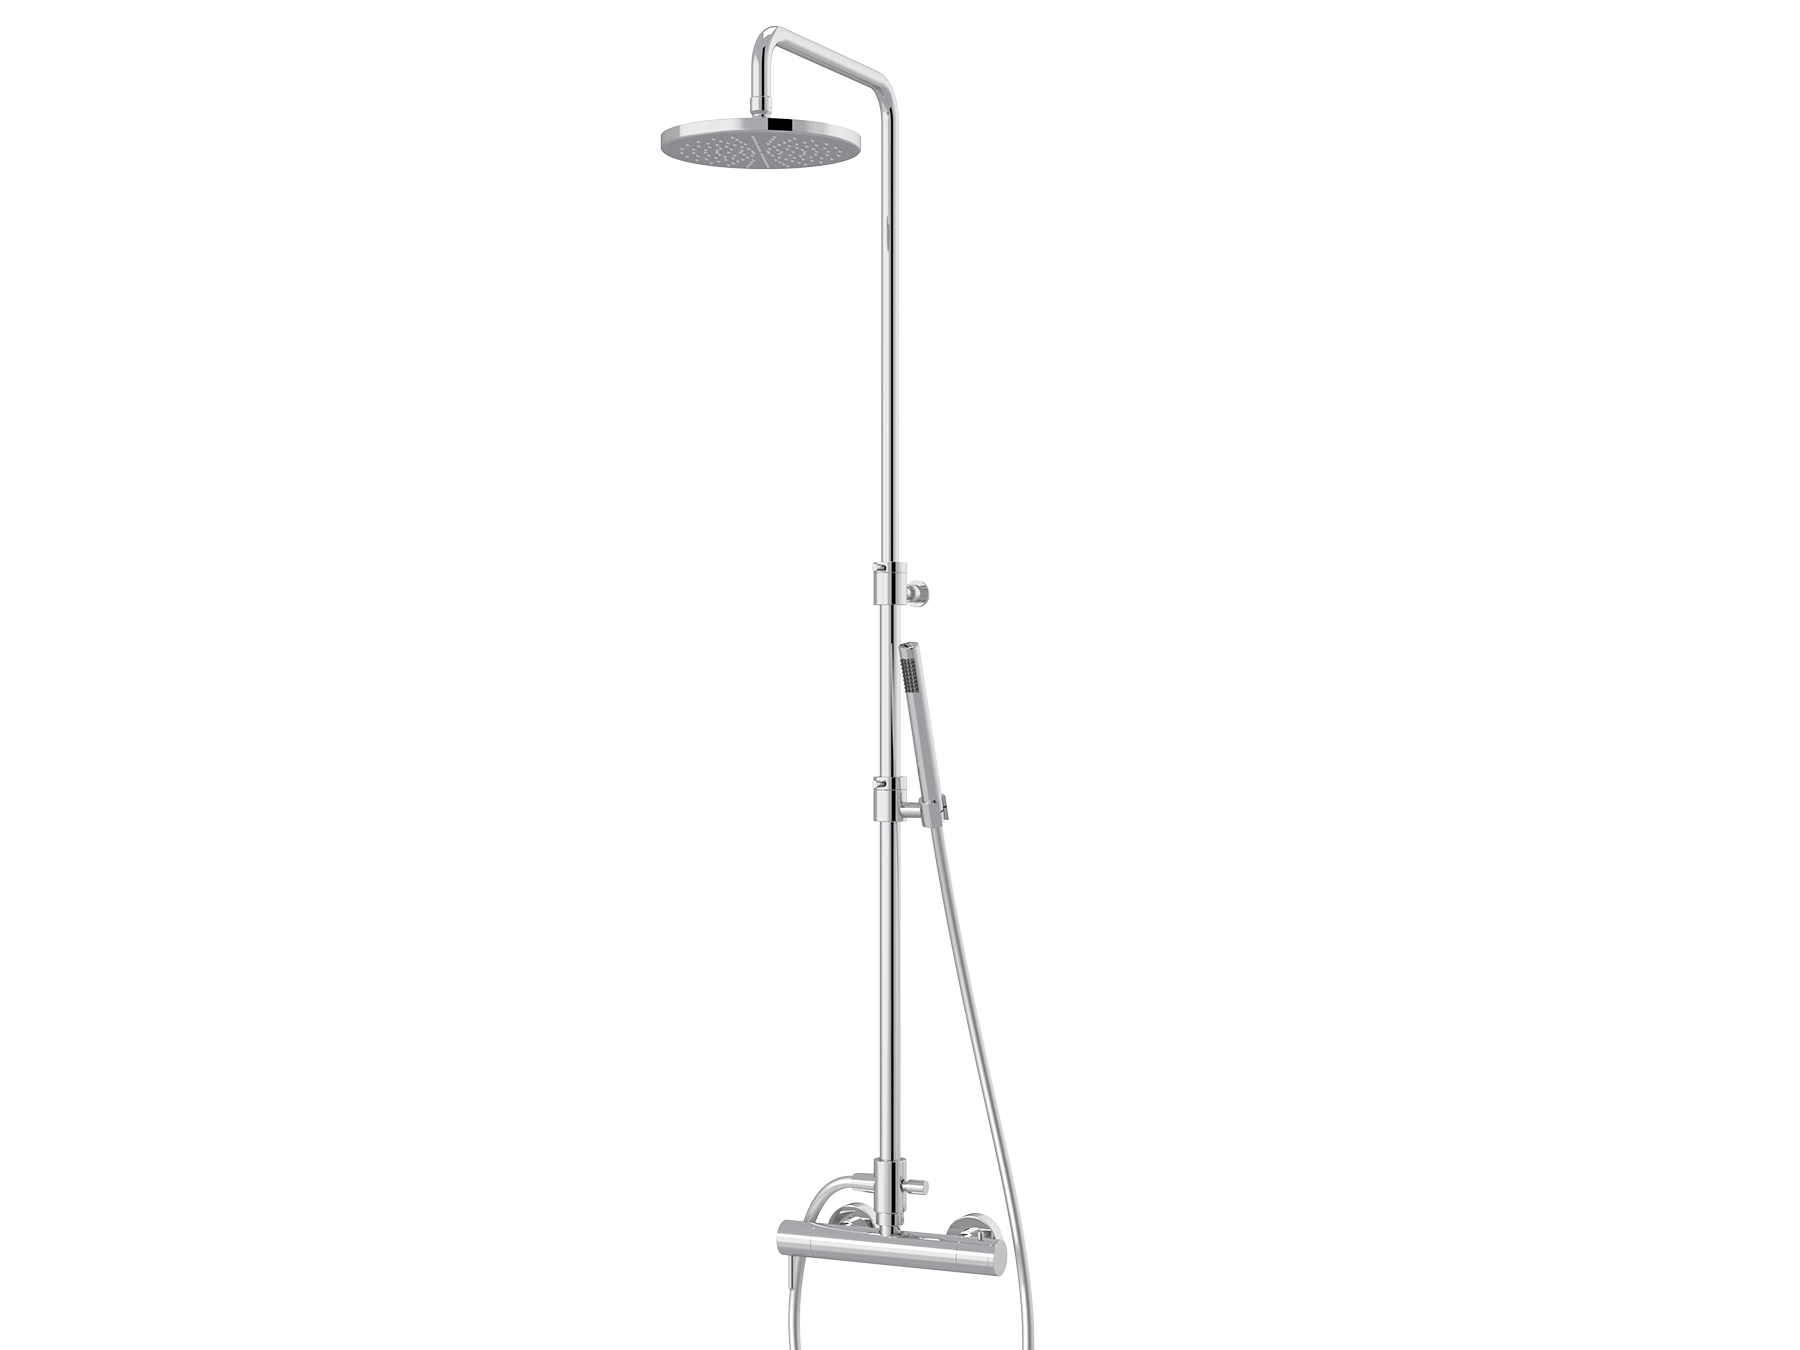 Set wall-mounted shower thermostatic with handshower, support, shower arm with diverter and rainshower head Ø 200 mm